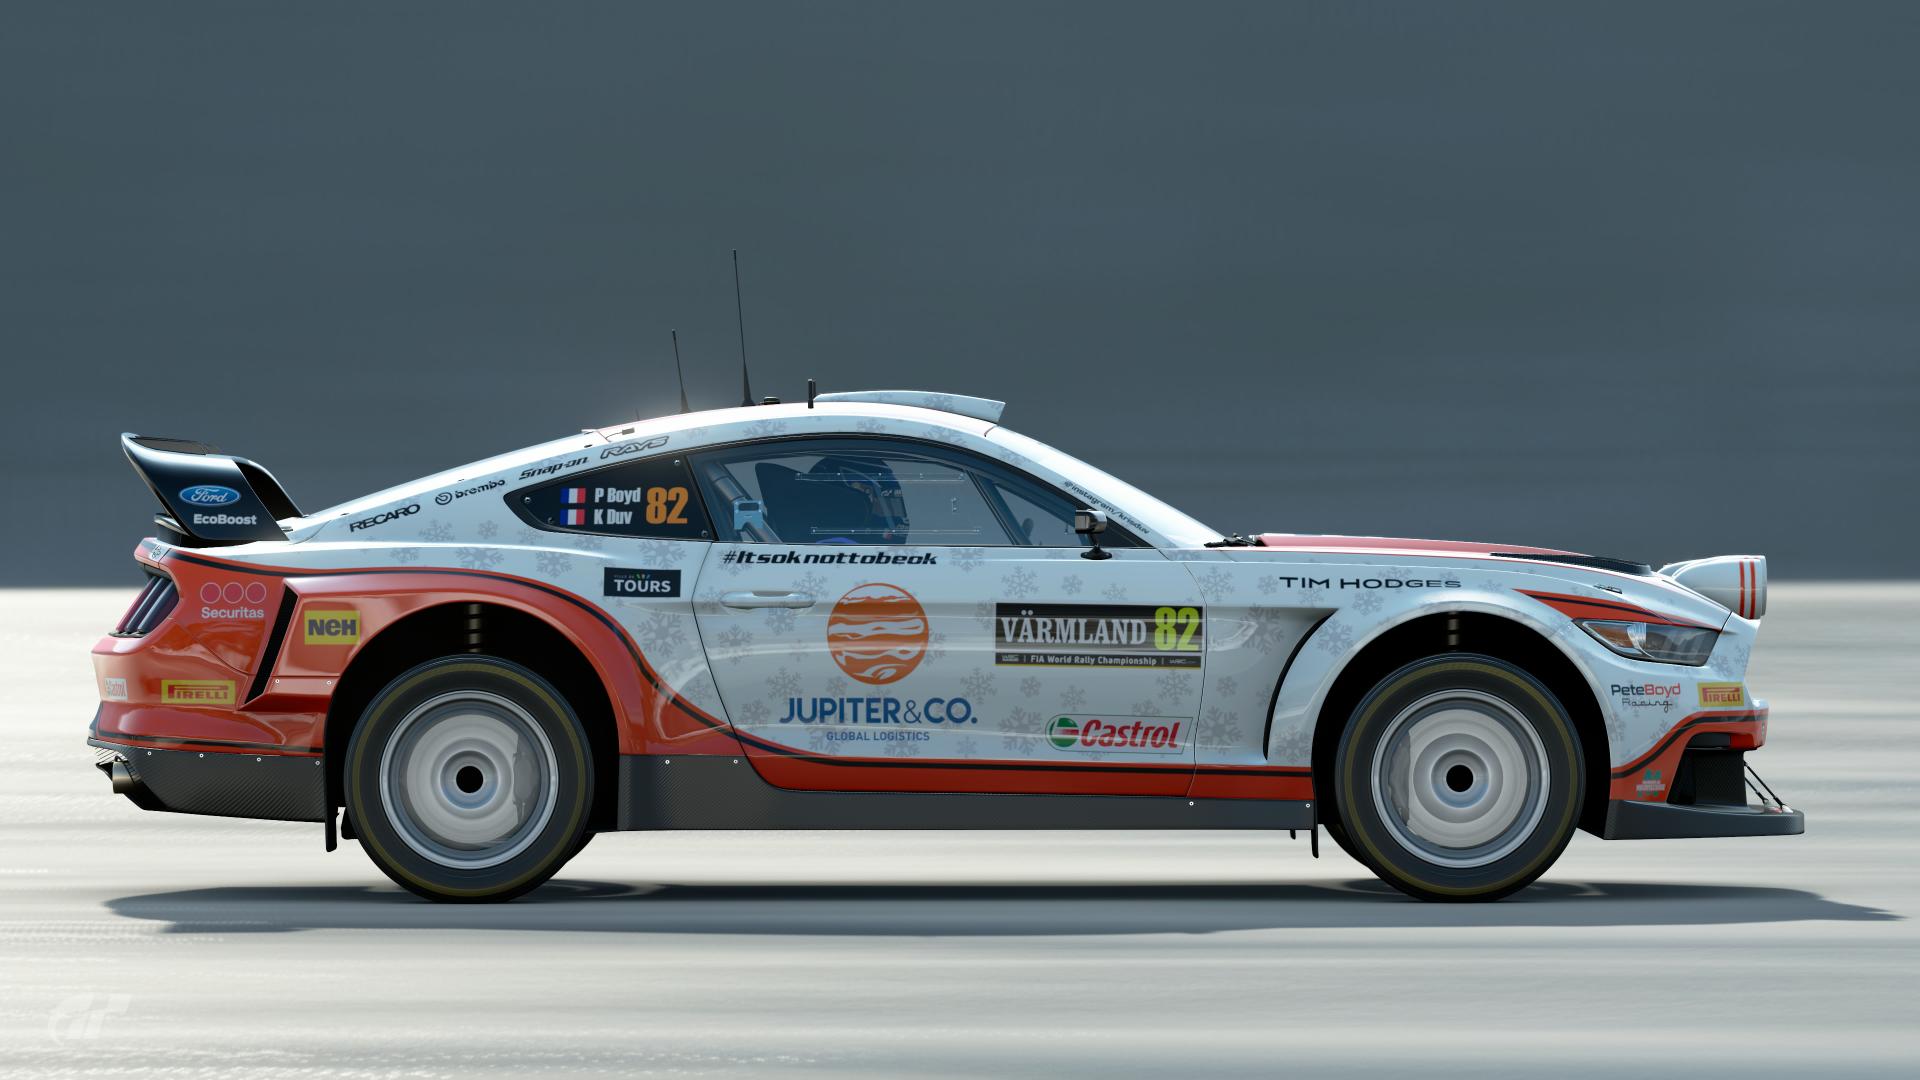 WRC Mustang Snowflake edition for Rally of Sweden